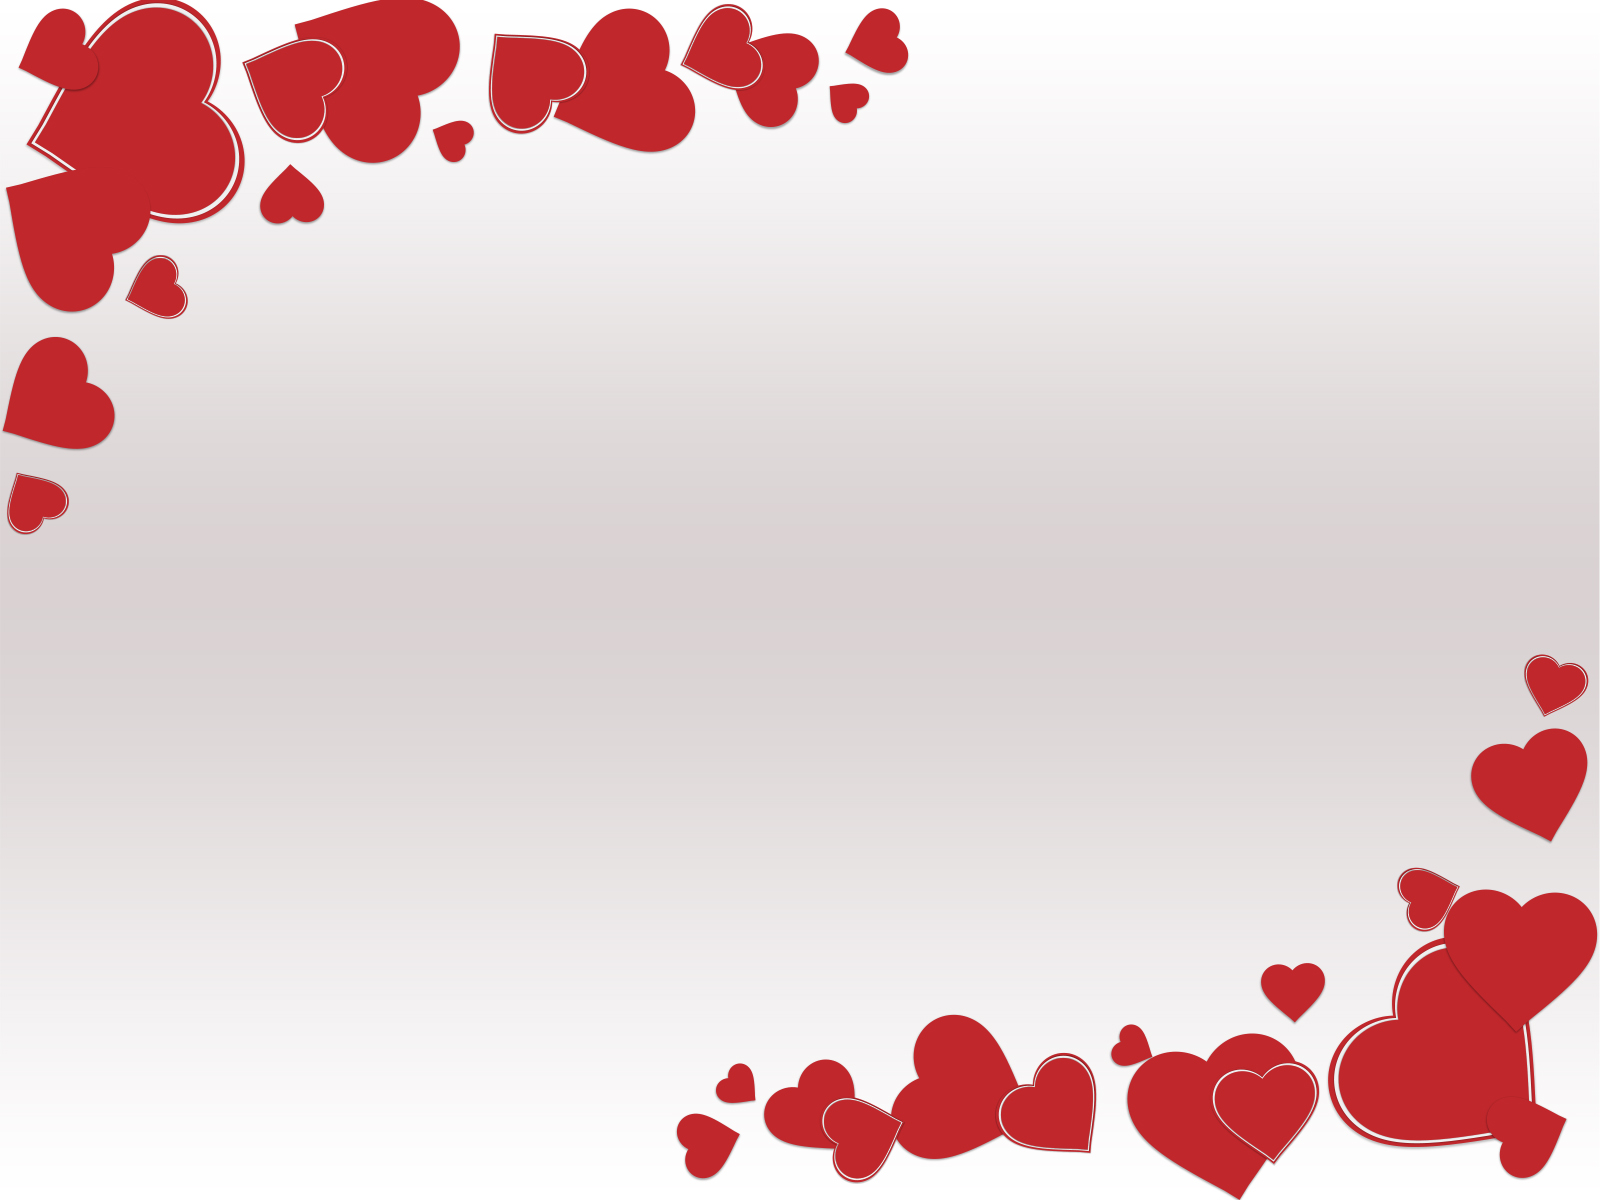 Grunge Valentine Day Backgrounds Love, Red, White Templates Free